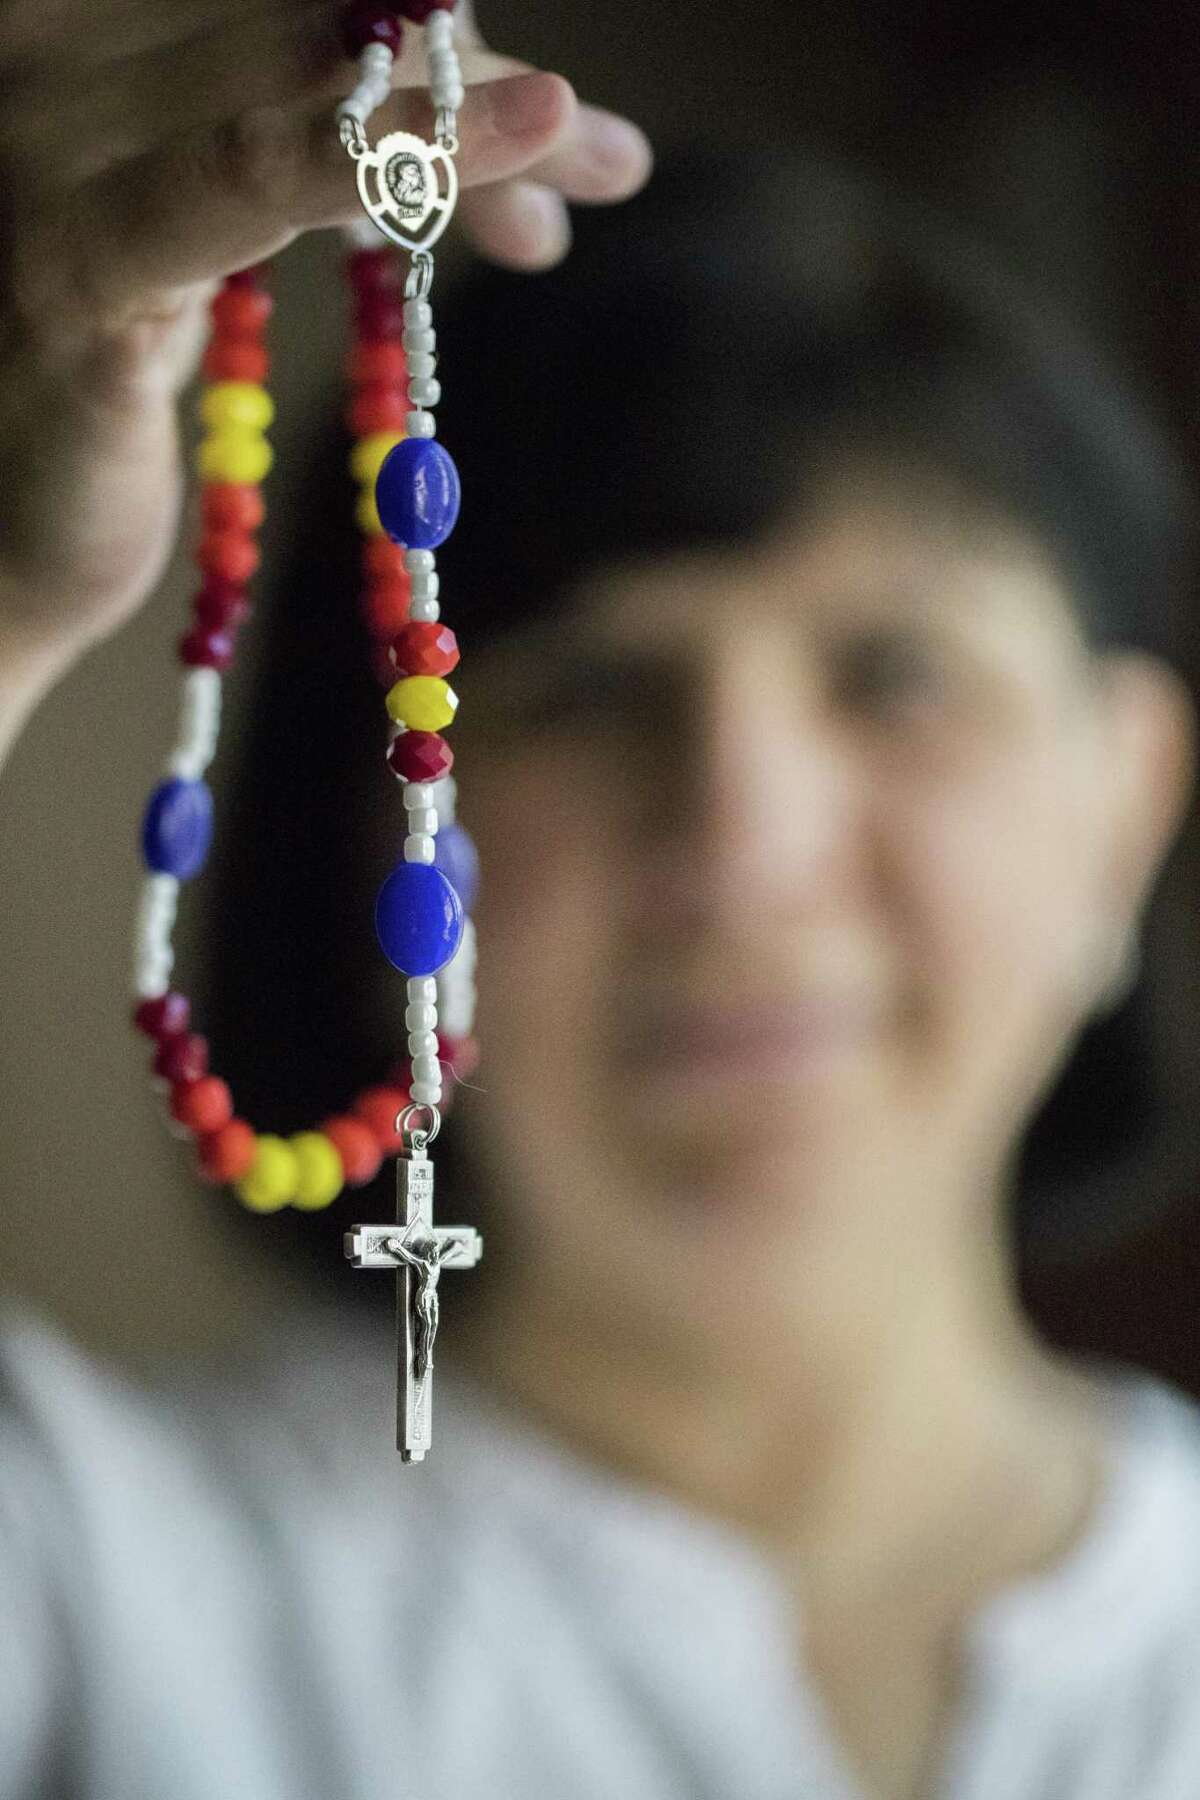 Maria Esther Aguilera has been making Astros rosaries since the 2017 baseball season. The rosaries became hot commodities during the Astros?’ run to the World Series and ended with crowds waiting in line for the rosary beads during the World Series. The designs vary and some of them are designed resembling the retro colors of the team. Monday, May 7, 2018, in Houston. ( Marie D. De Jesus / Houston Chronicle )